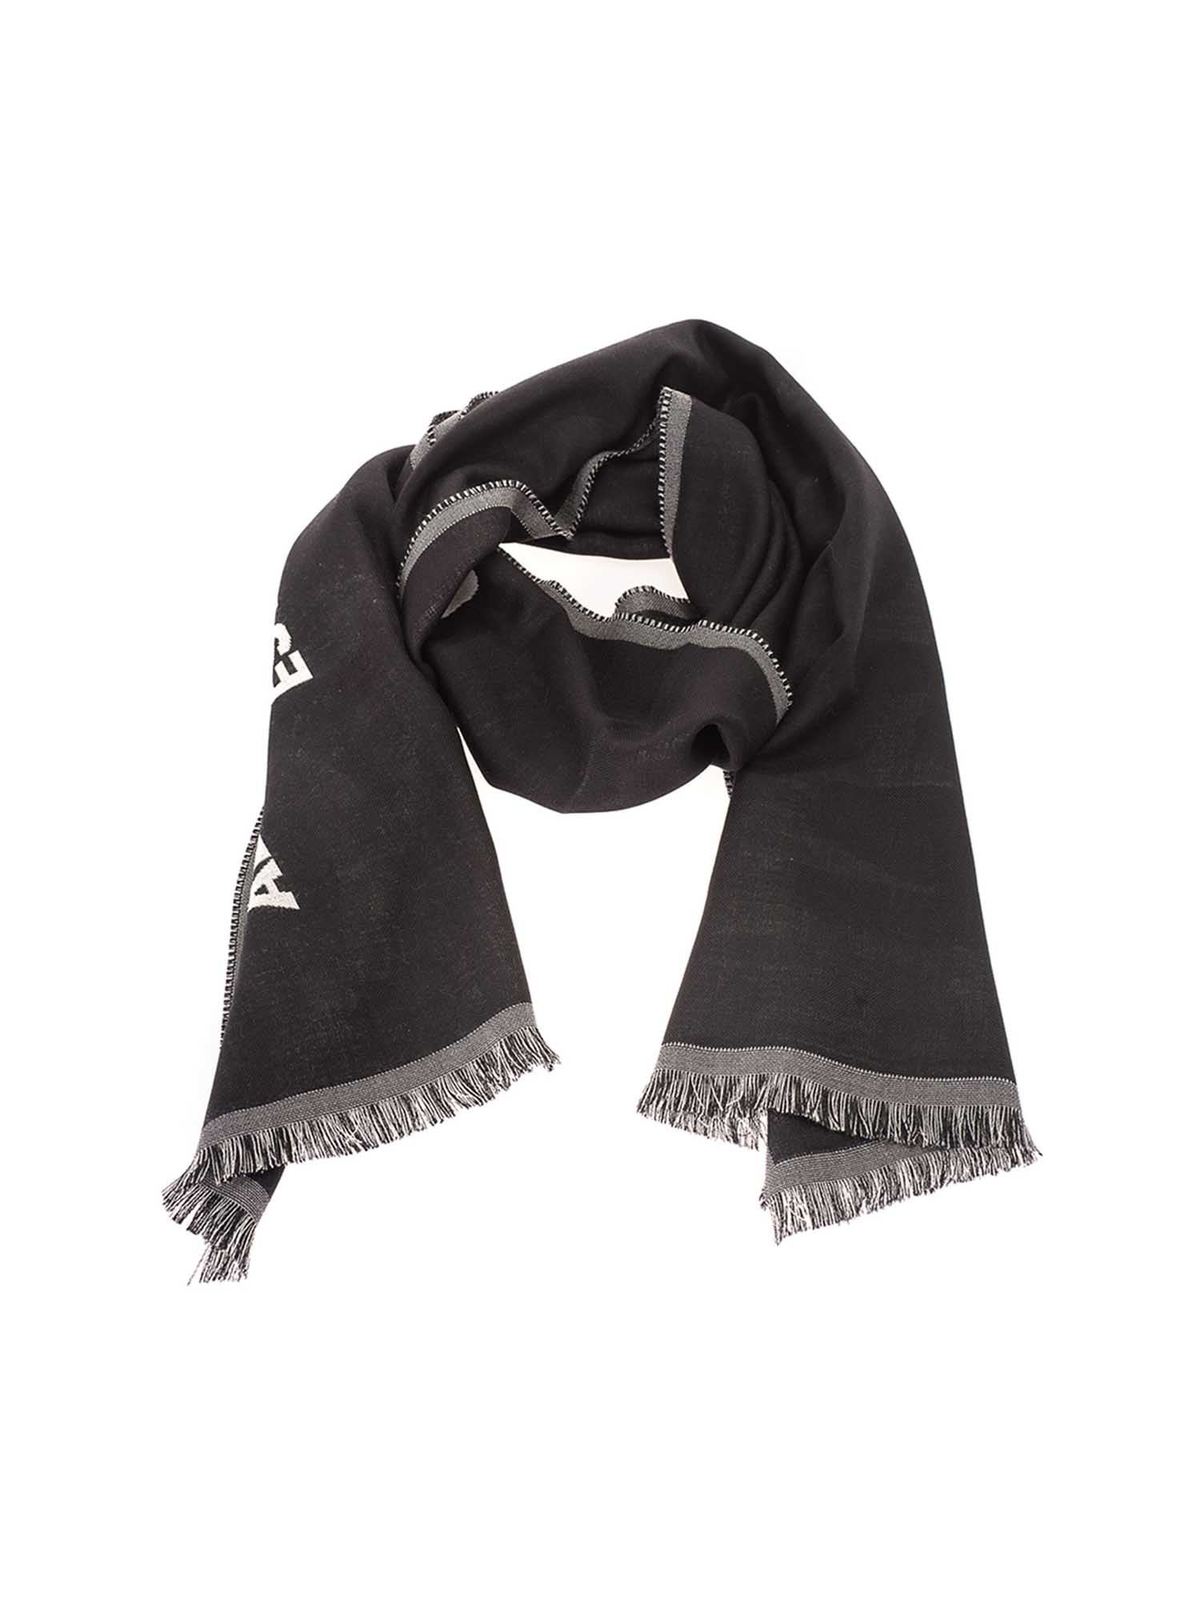 Alexander Mcqueen Logo Foulard In Black And Ivory Color